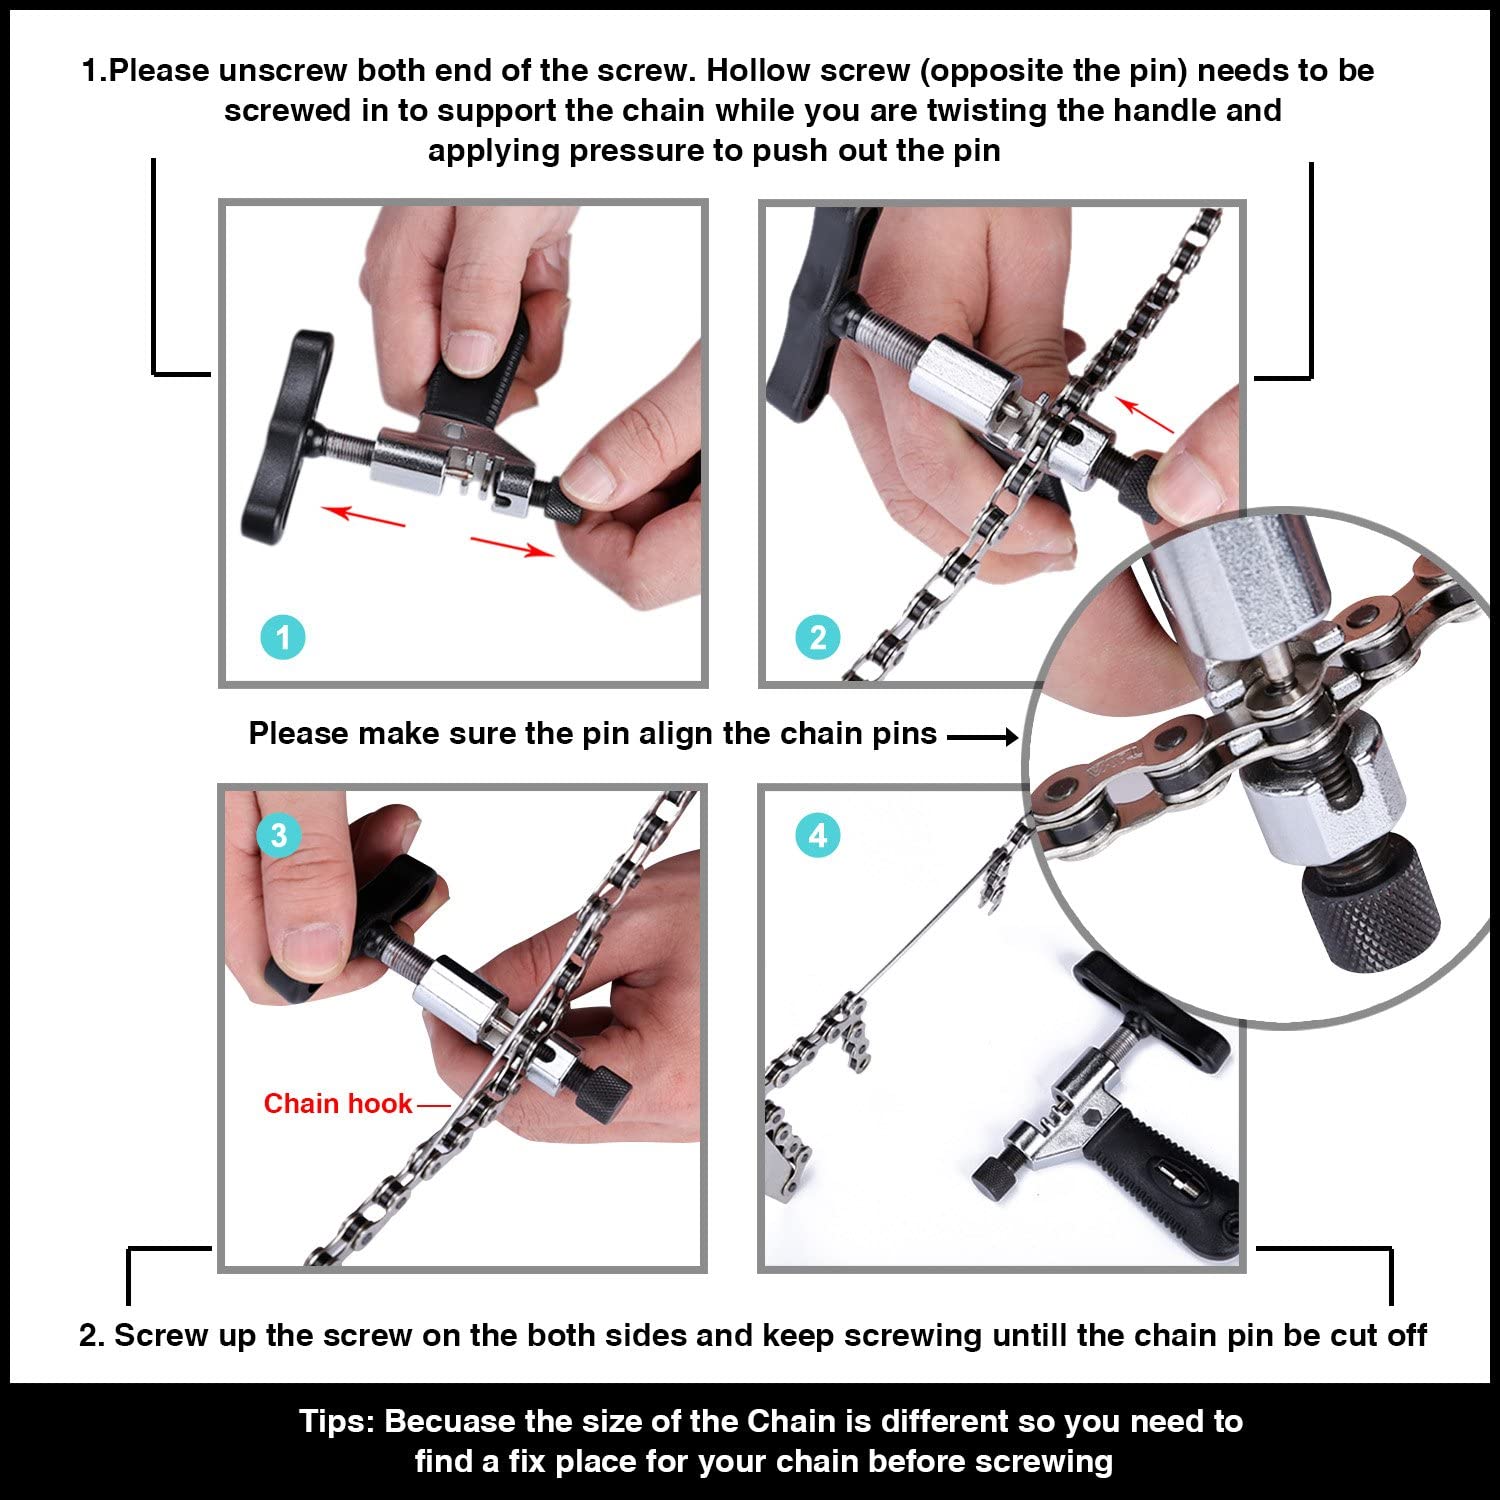 Depending on the type and brand of your chain, a chain tool may be necessary to undo the old chain and then connect the new one.